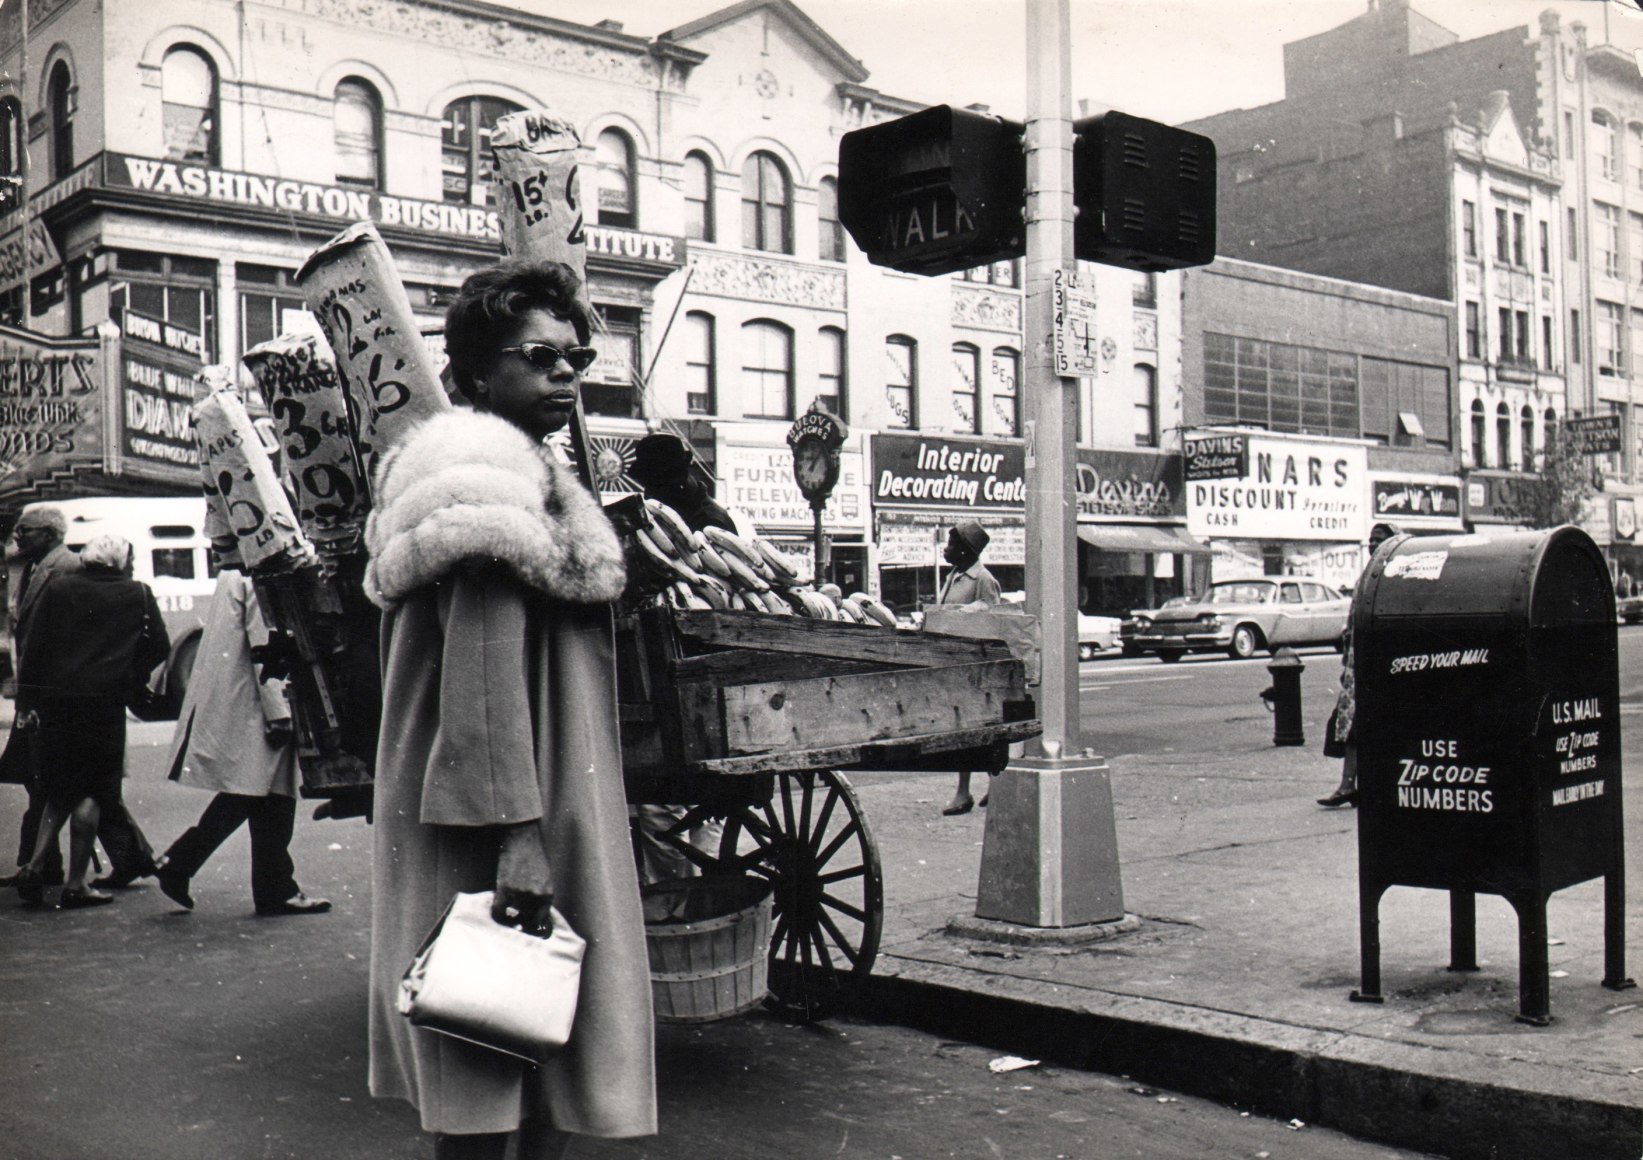 10B. Jan Lukas, Untitled, 1964. A woman in sunglasses and fur stands in the foreground at a street corner in front of a produce cart.